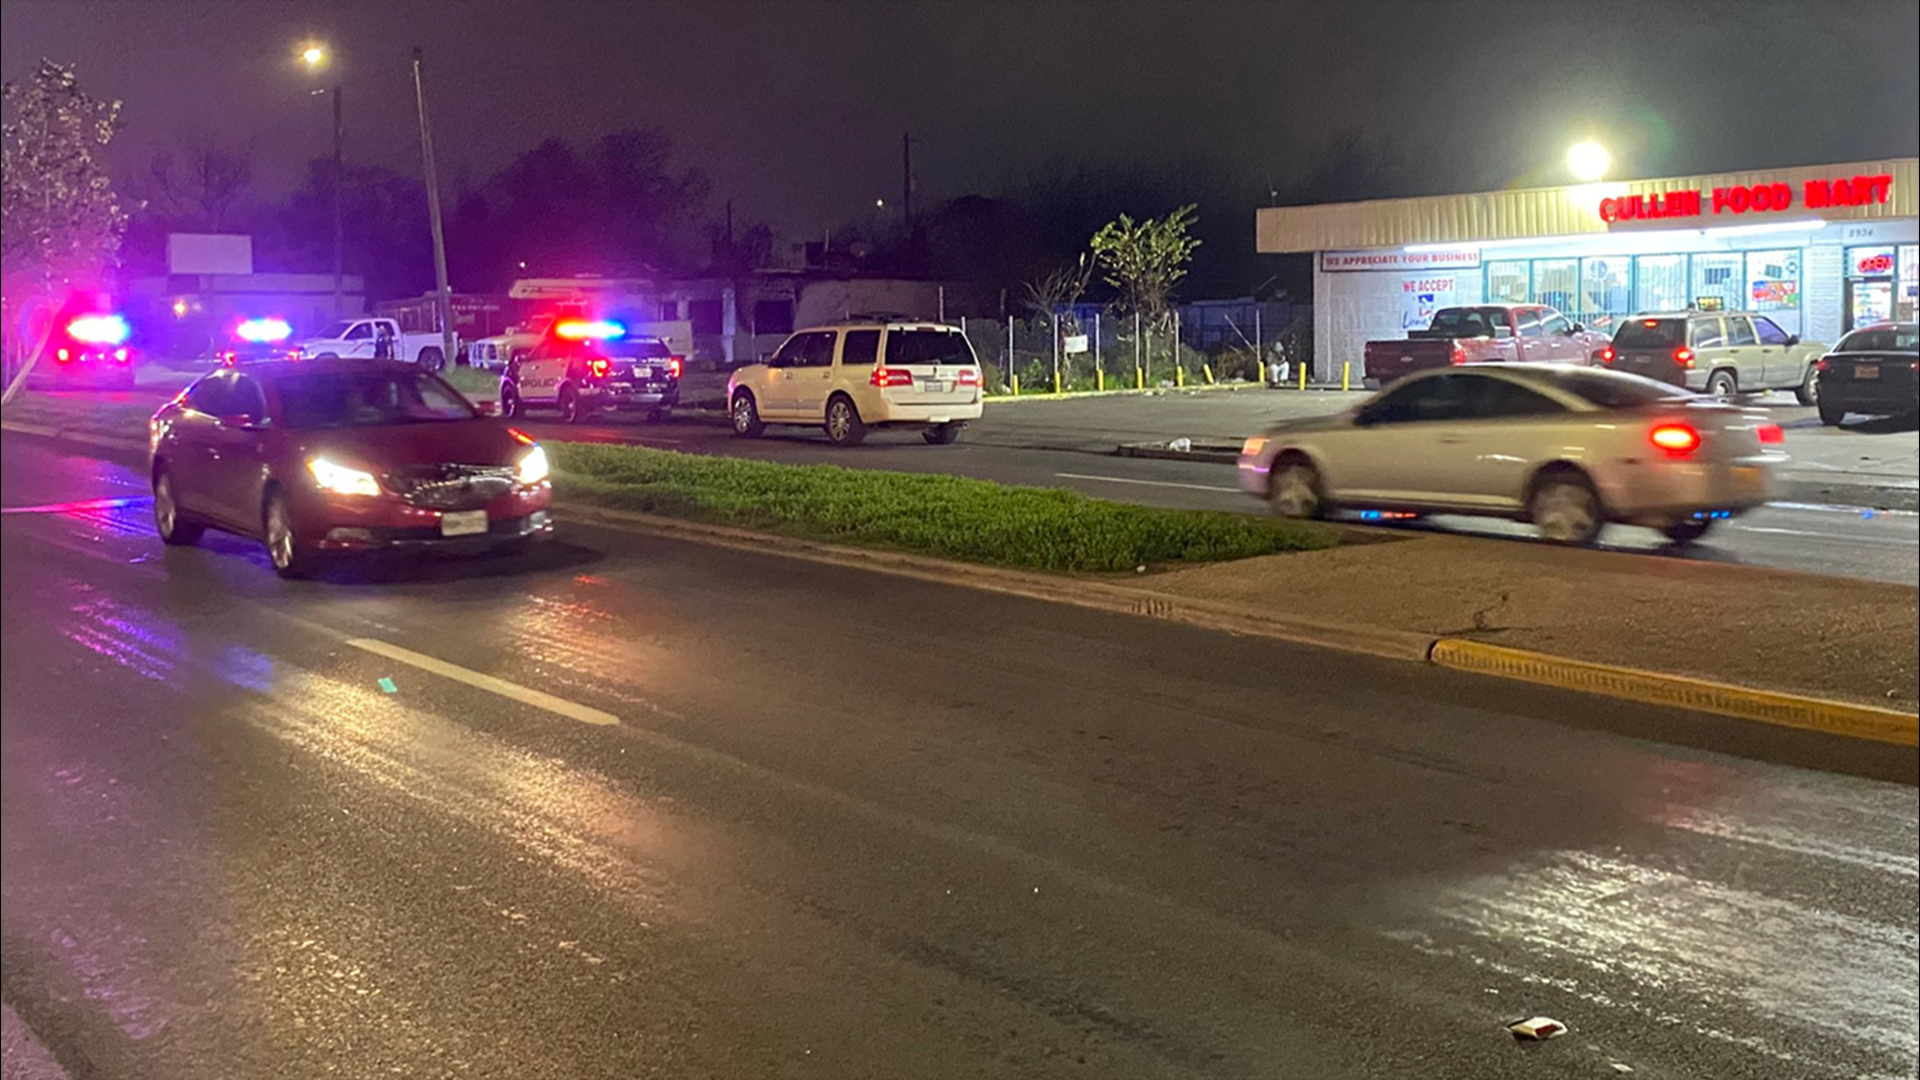 Police said, the woman was found near a convenience store in the 8900 block of Cullen Boulevard. She was taken to an area hospital, where she died.